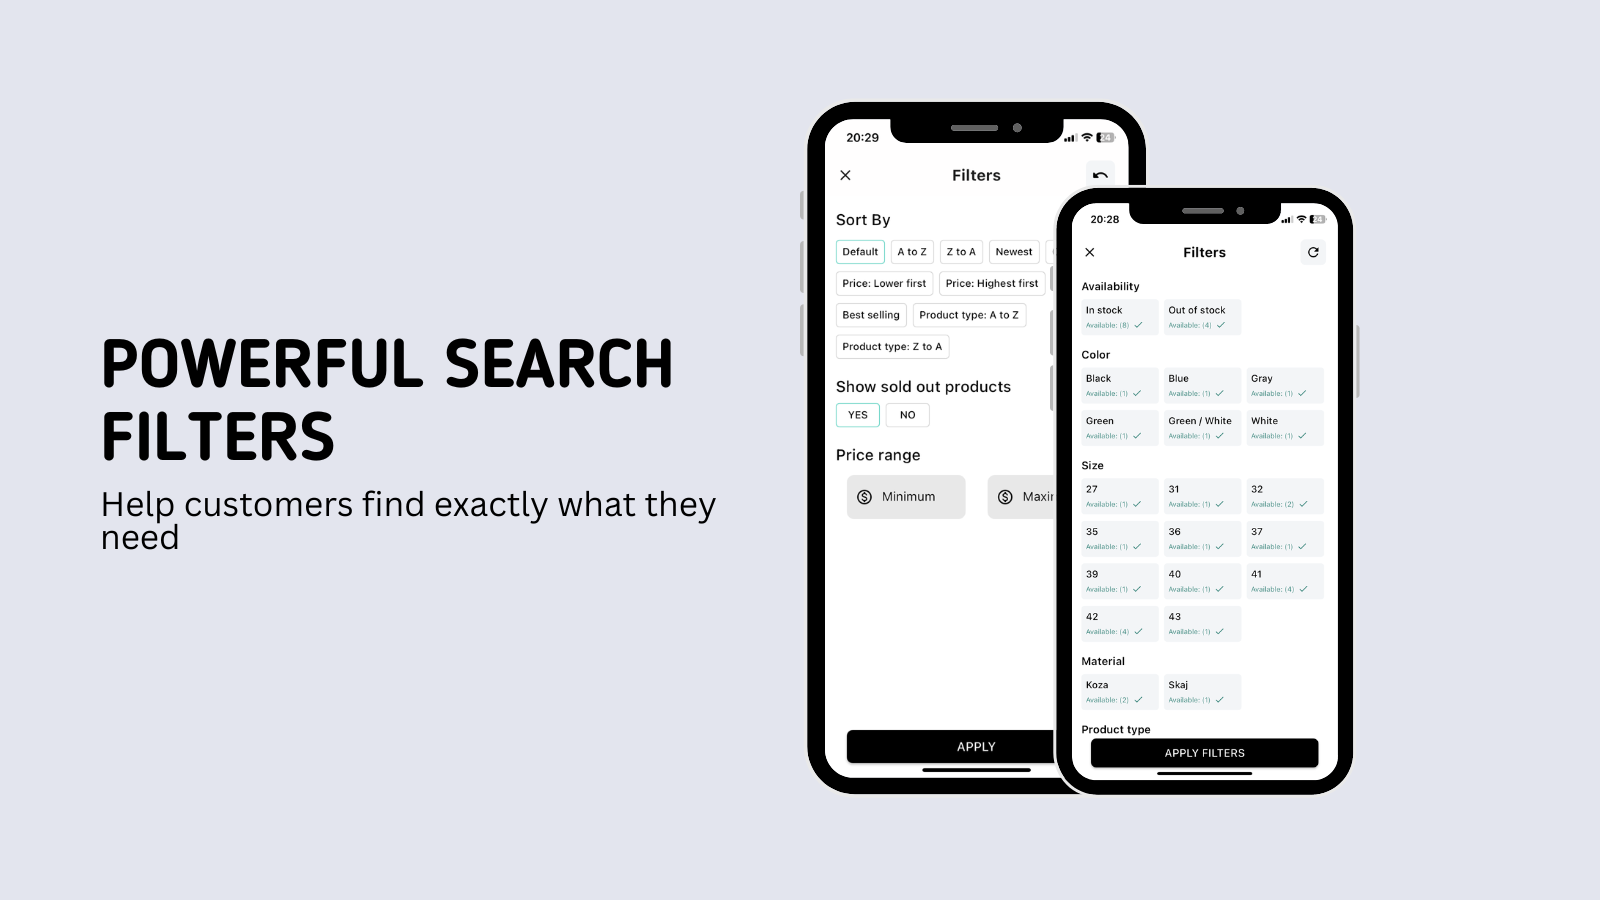 Powerful search filters